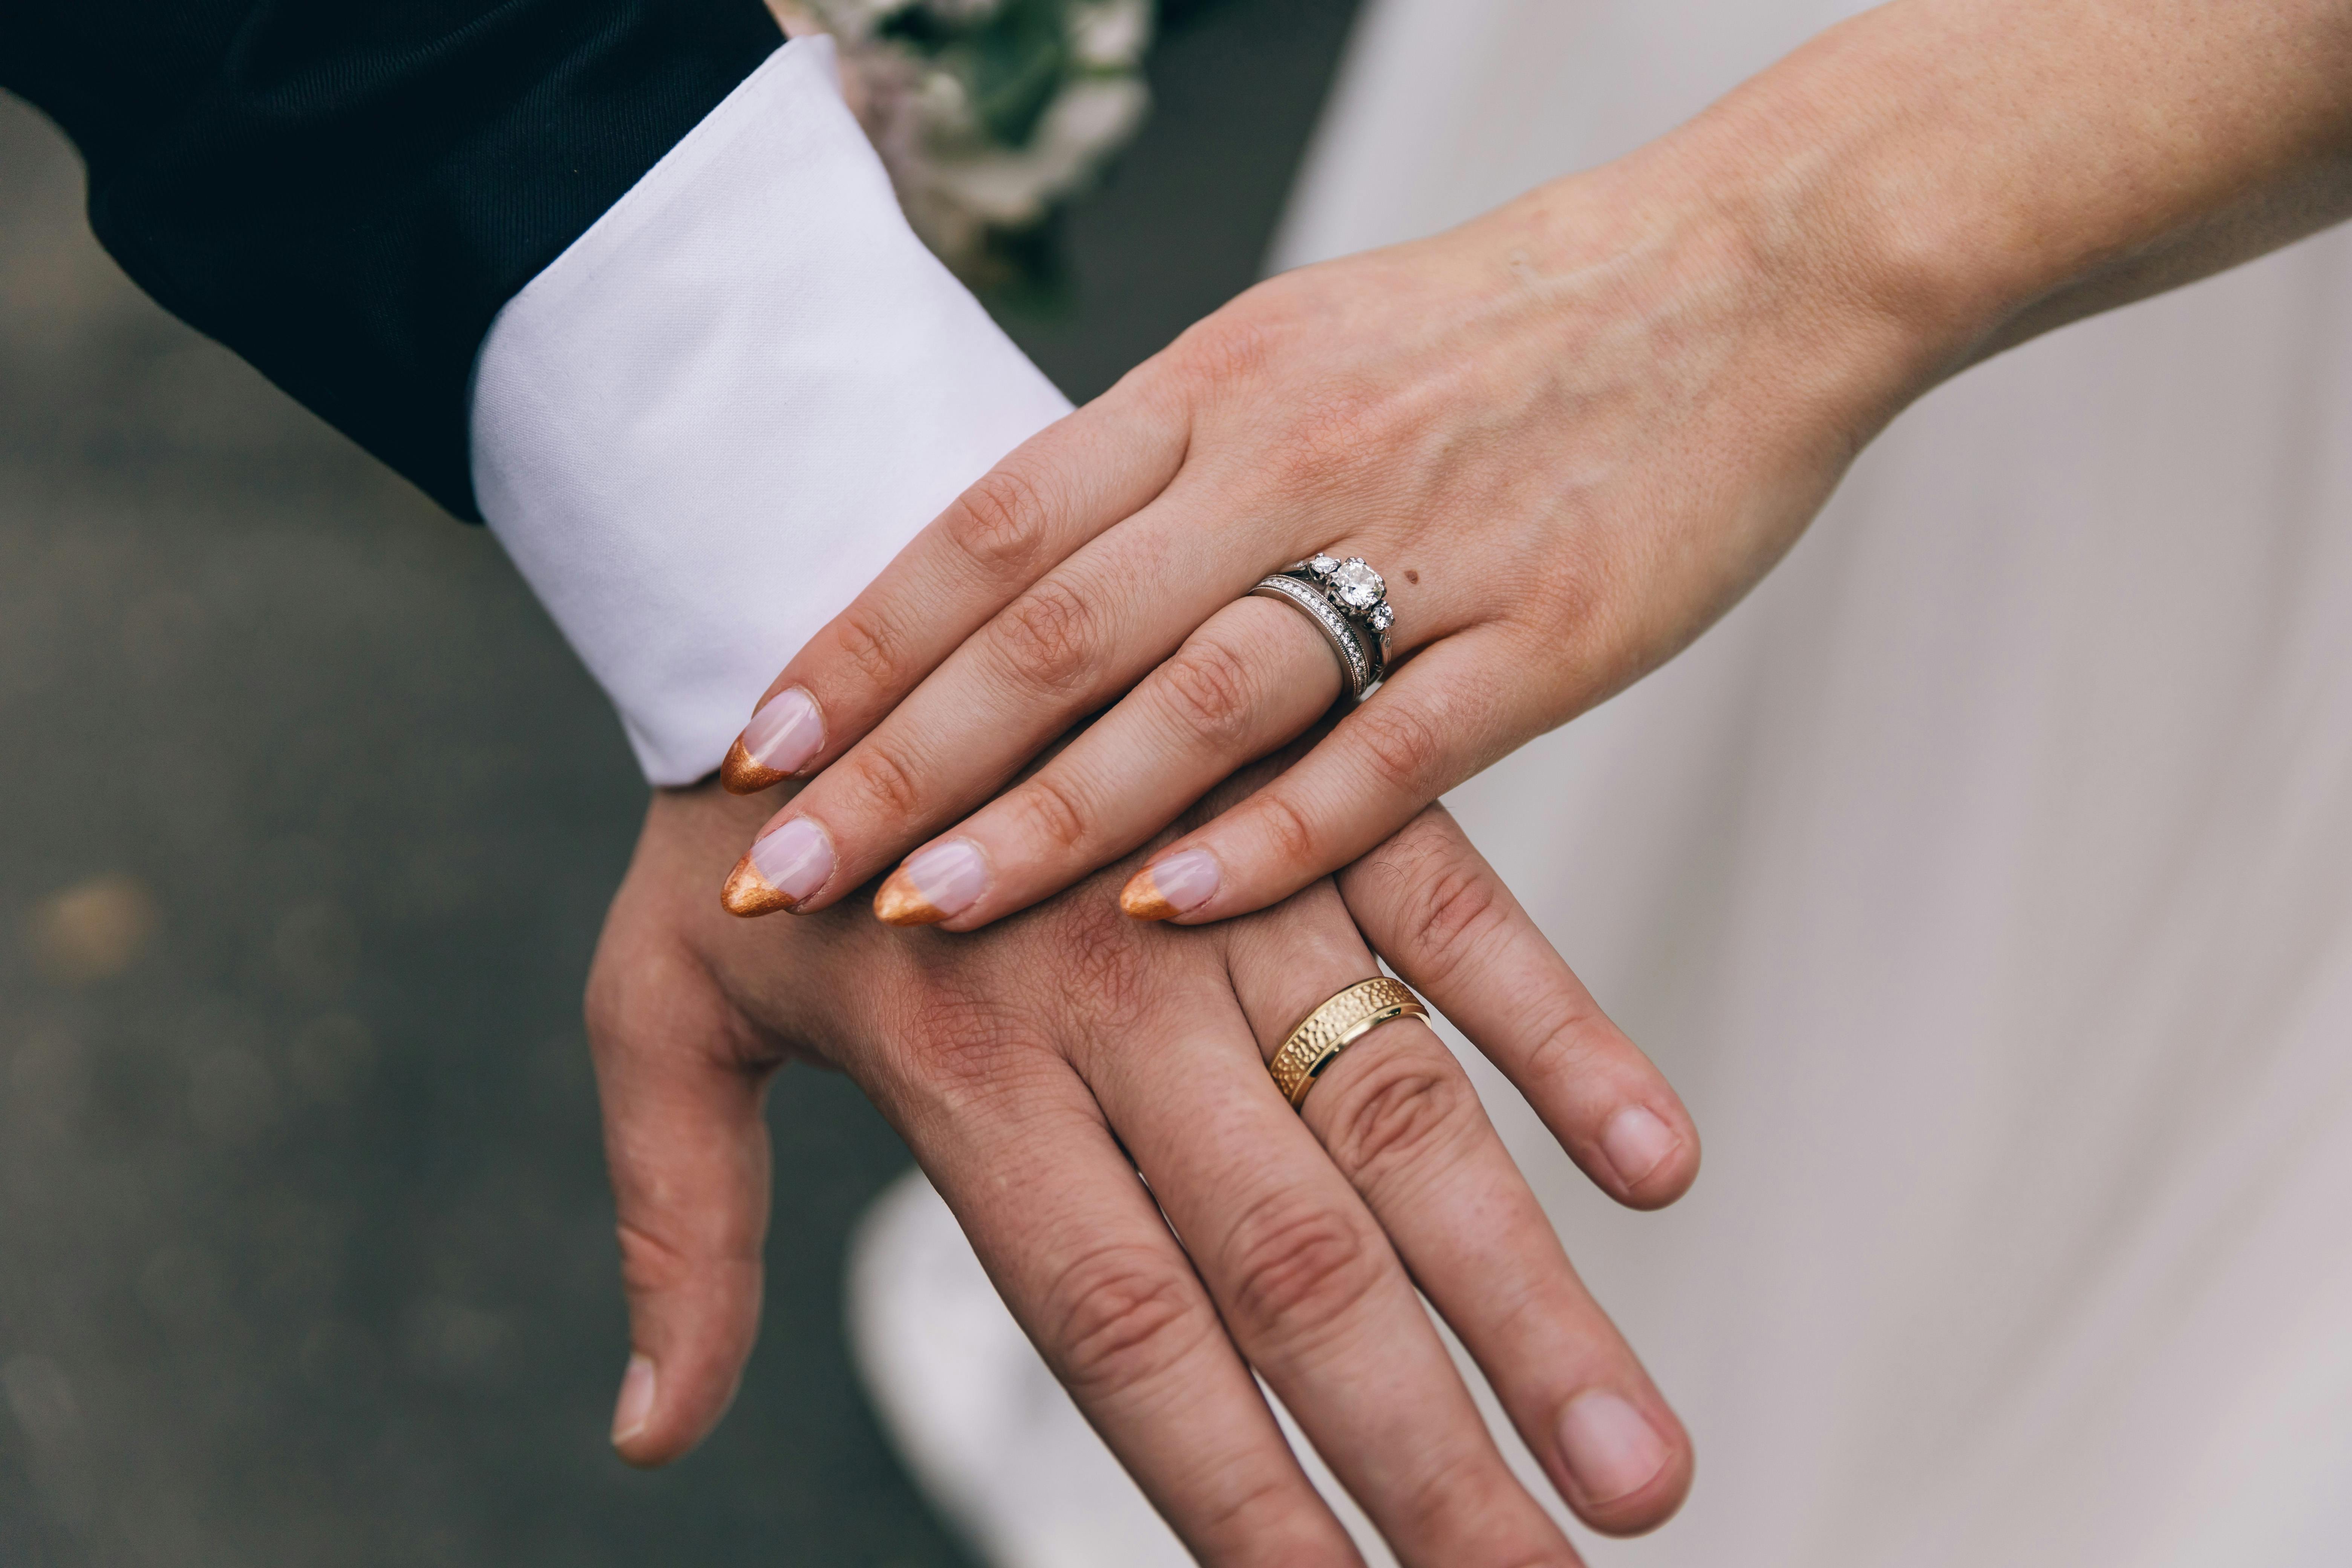 Wedding Ring History and Why We Wear Rings on the Left Hand